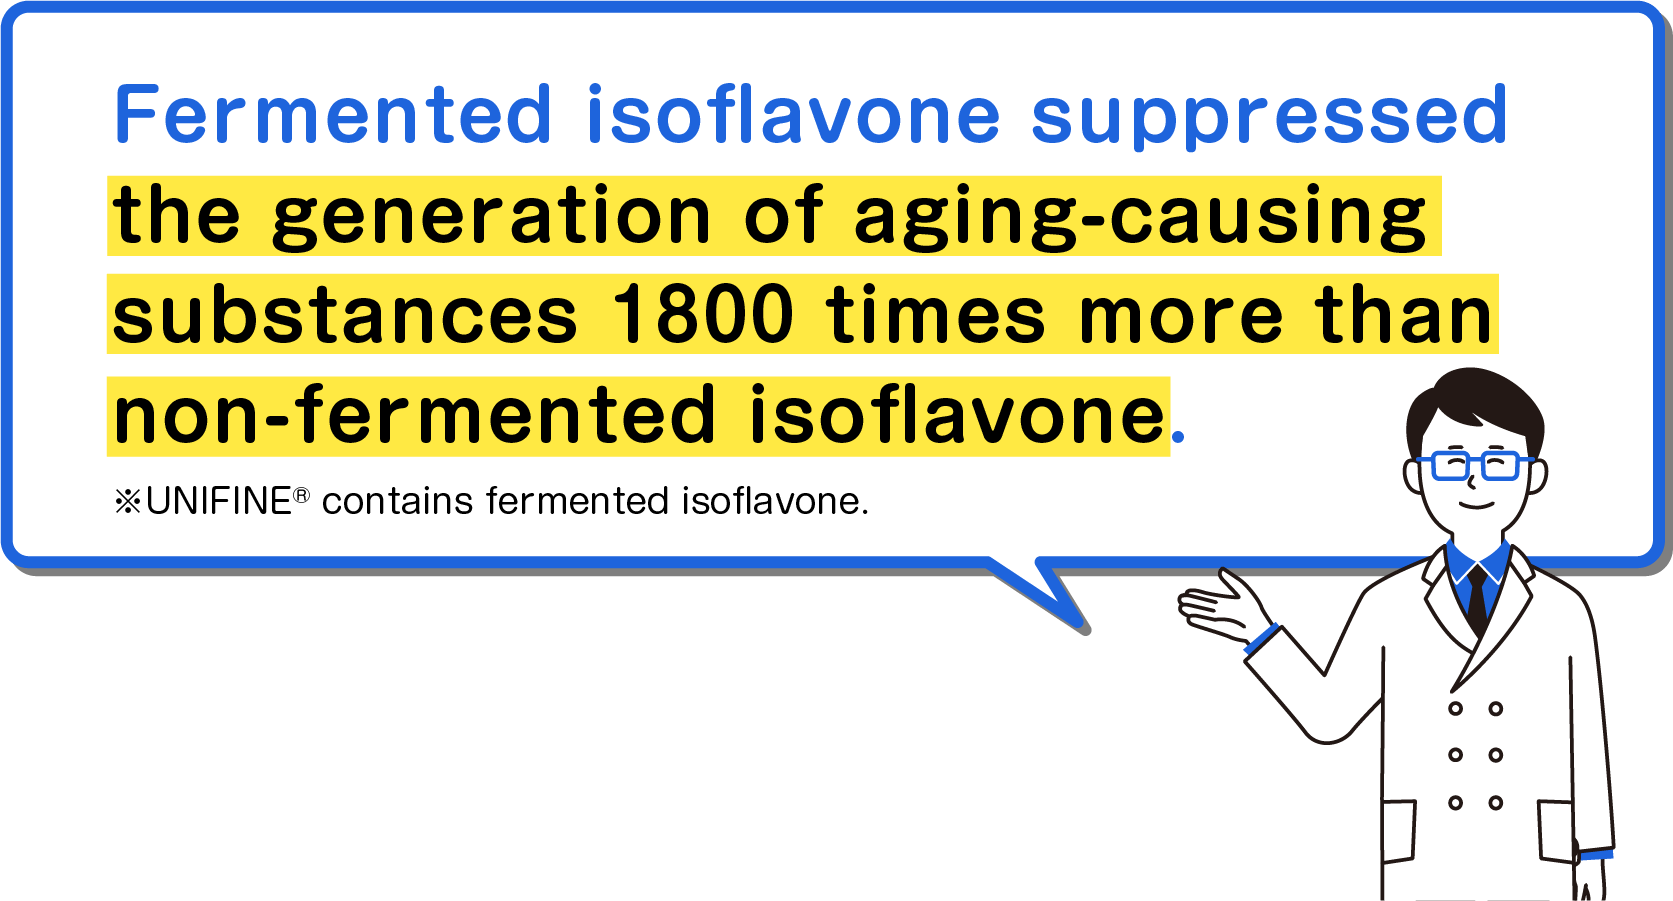 Fermented isoflavone suppressed the generation of aging-causing substances 1800 times more than non-fermented isoflavone.